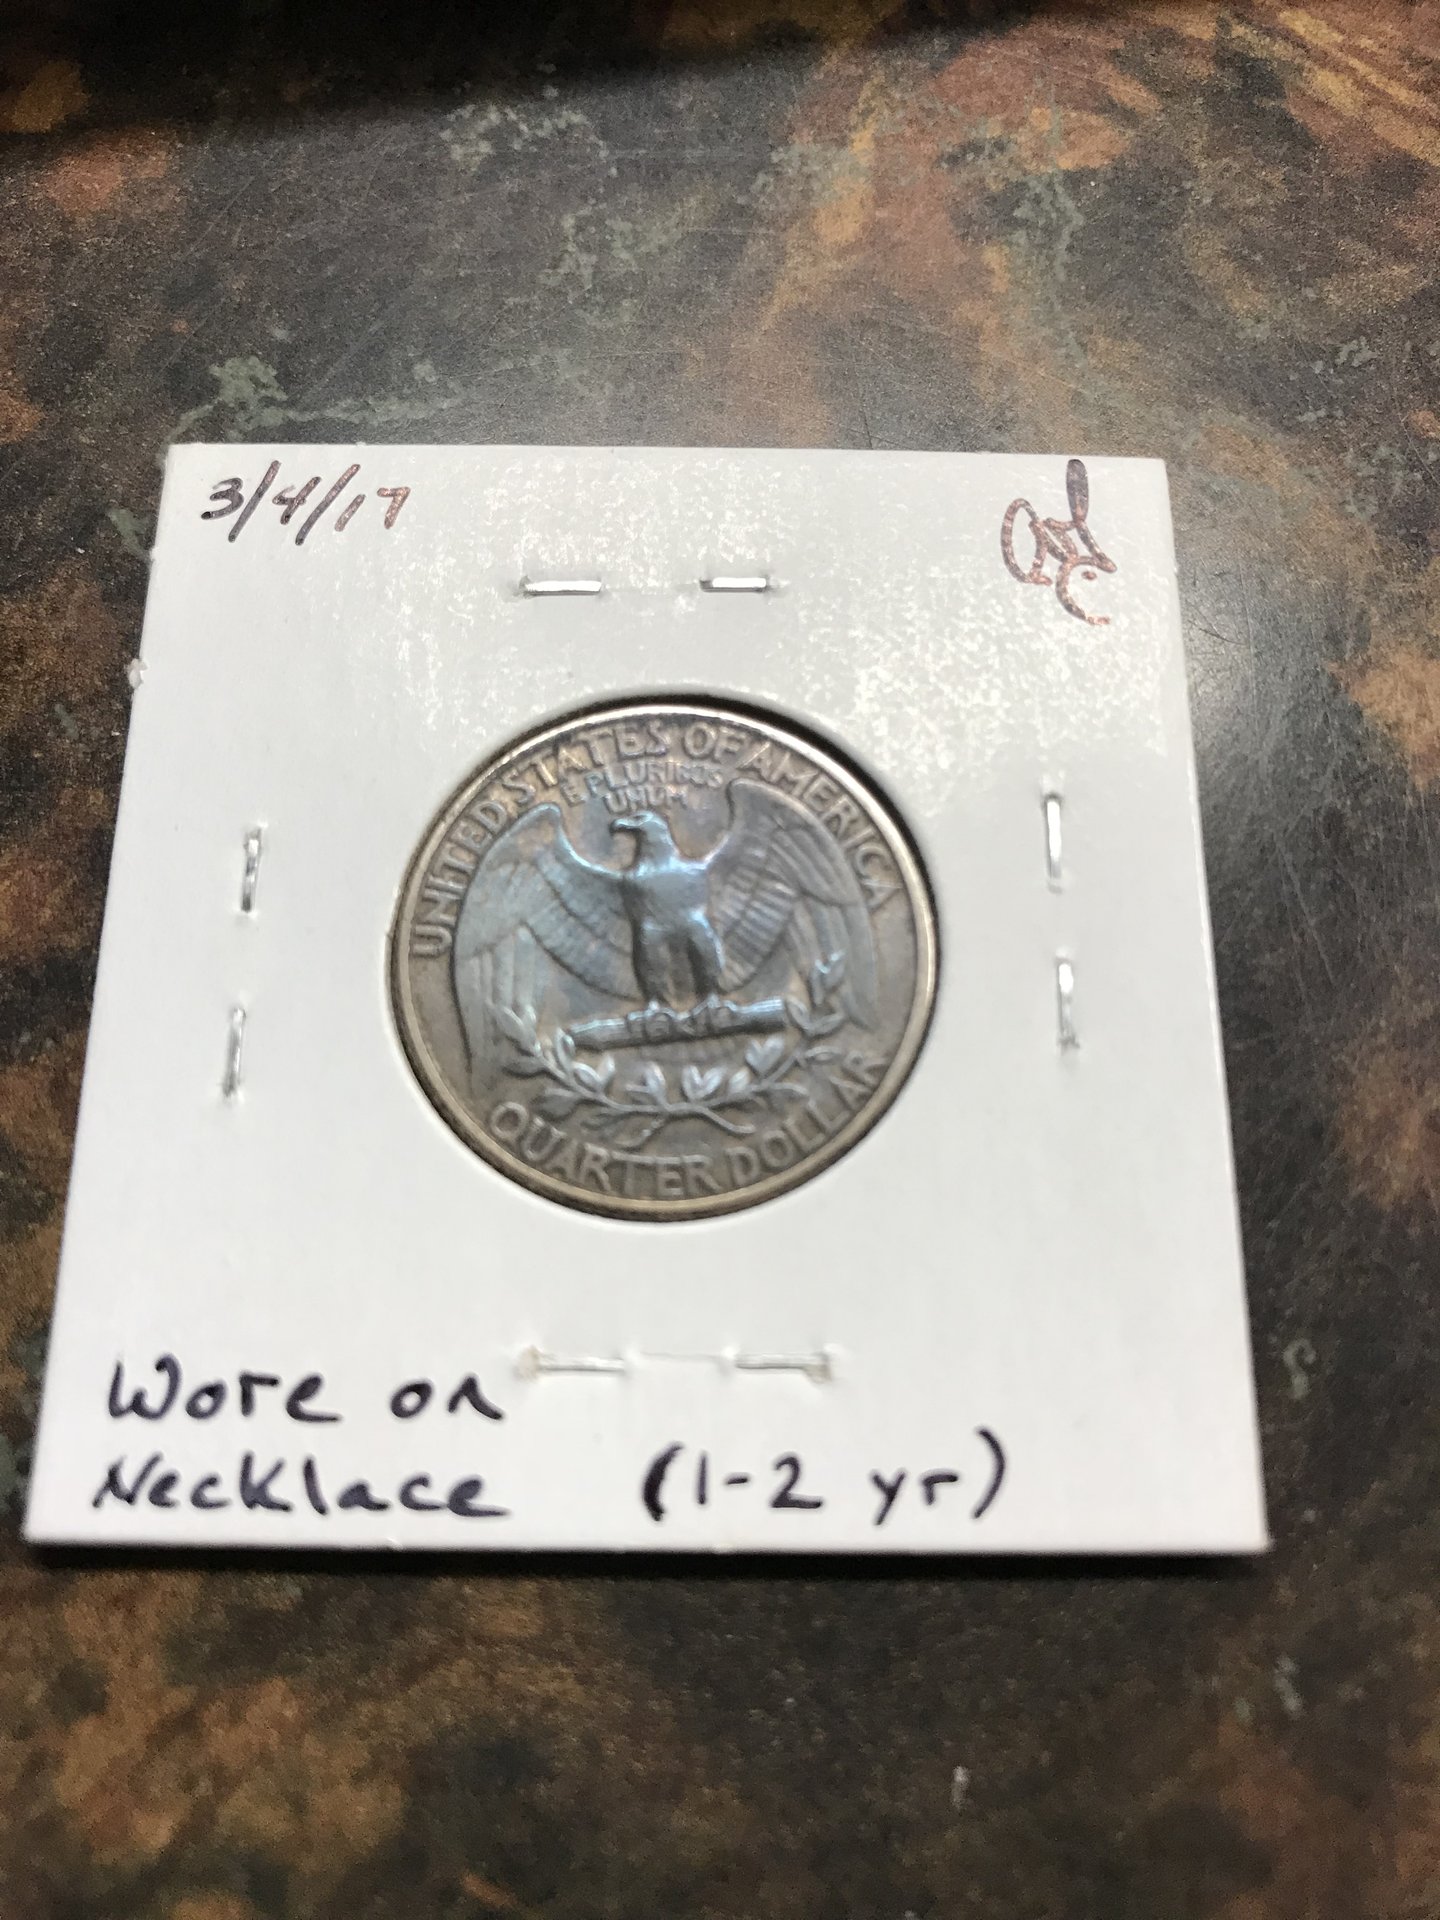 New here. I have a odd question about holding silver coin.